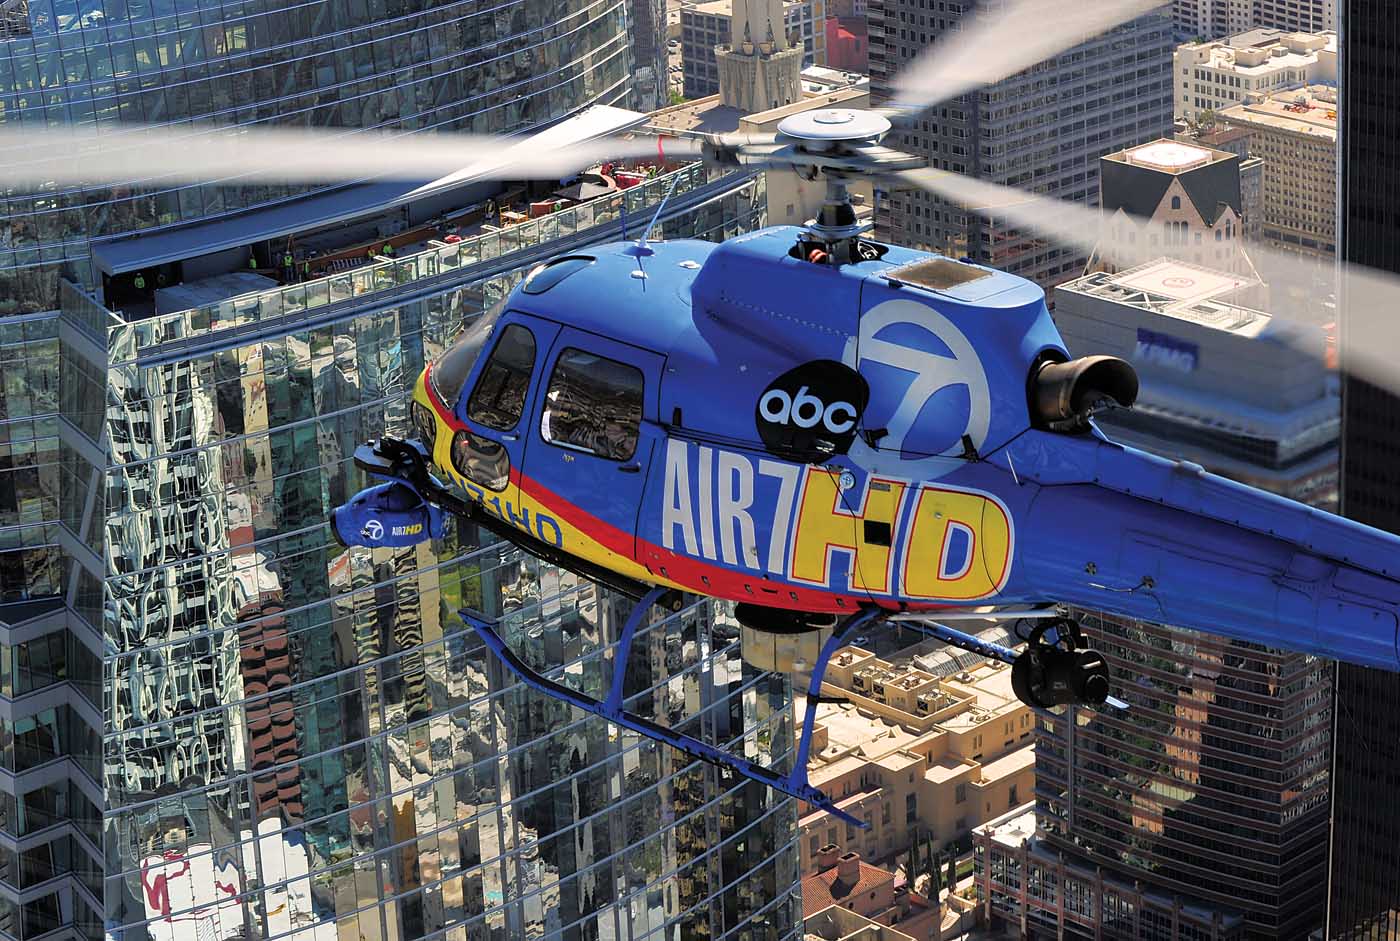 With all of Southern California to cover, Air 7 HD could be working a story over downtown L.A. and 20 minutes later be covering a story in the mountains of the Angeles Forest.